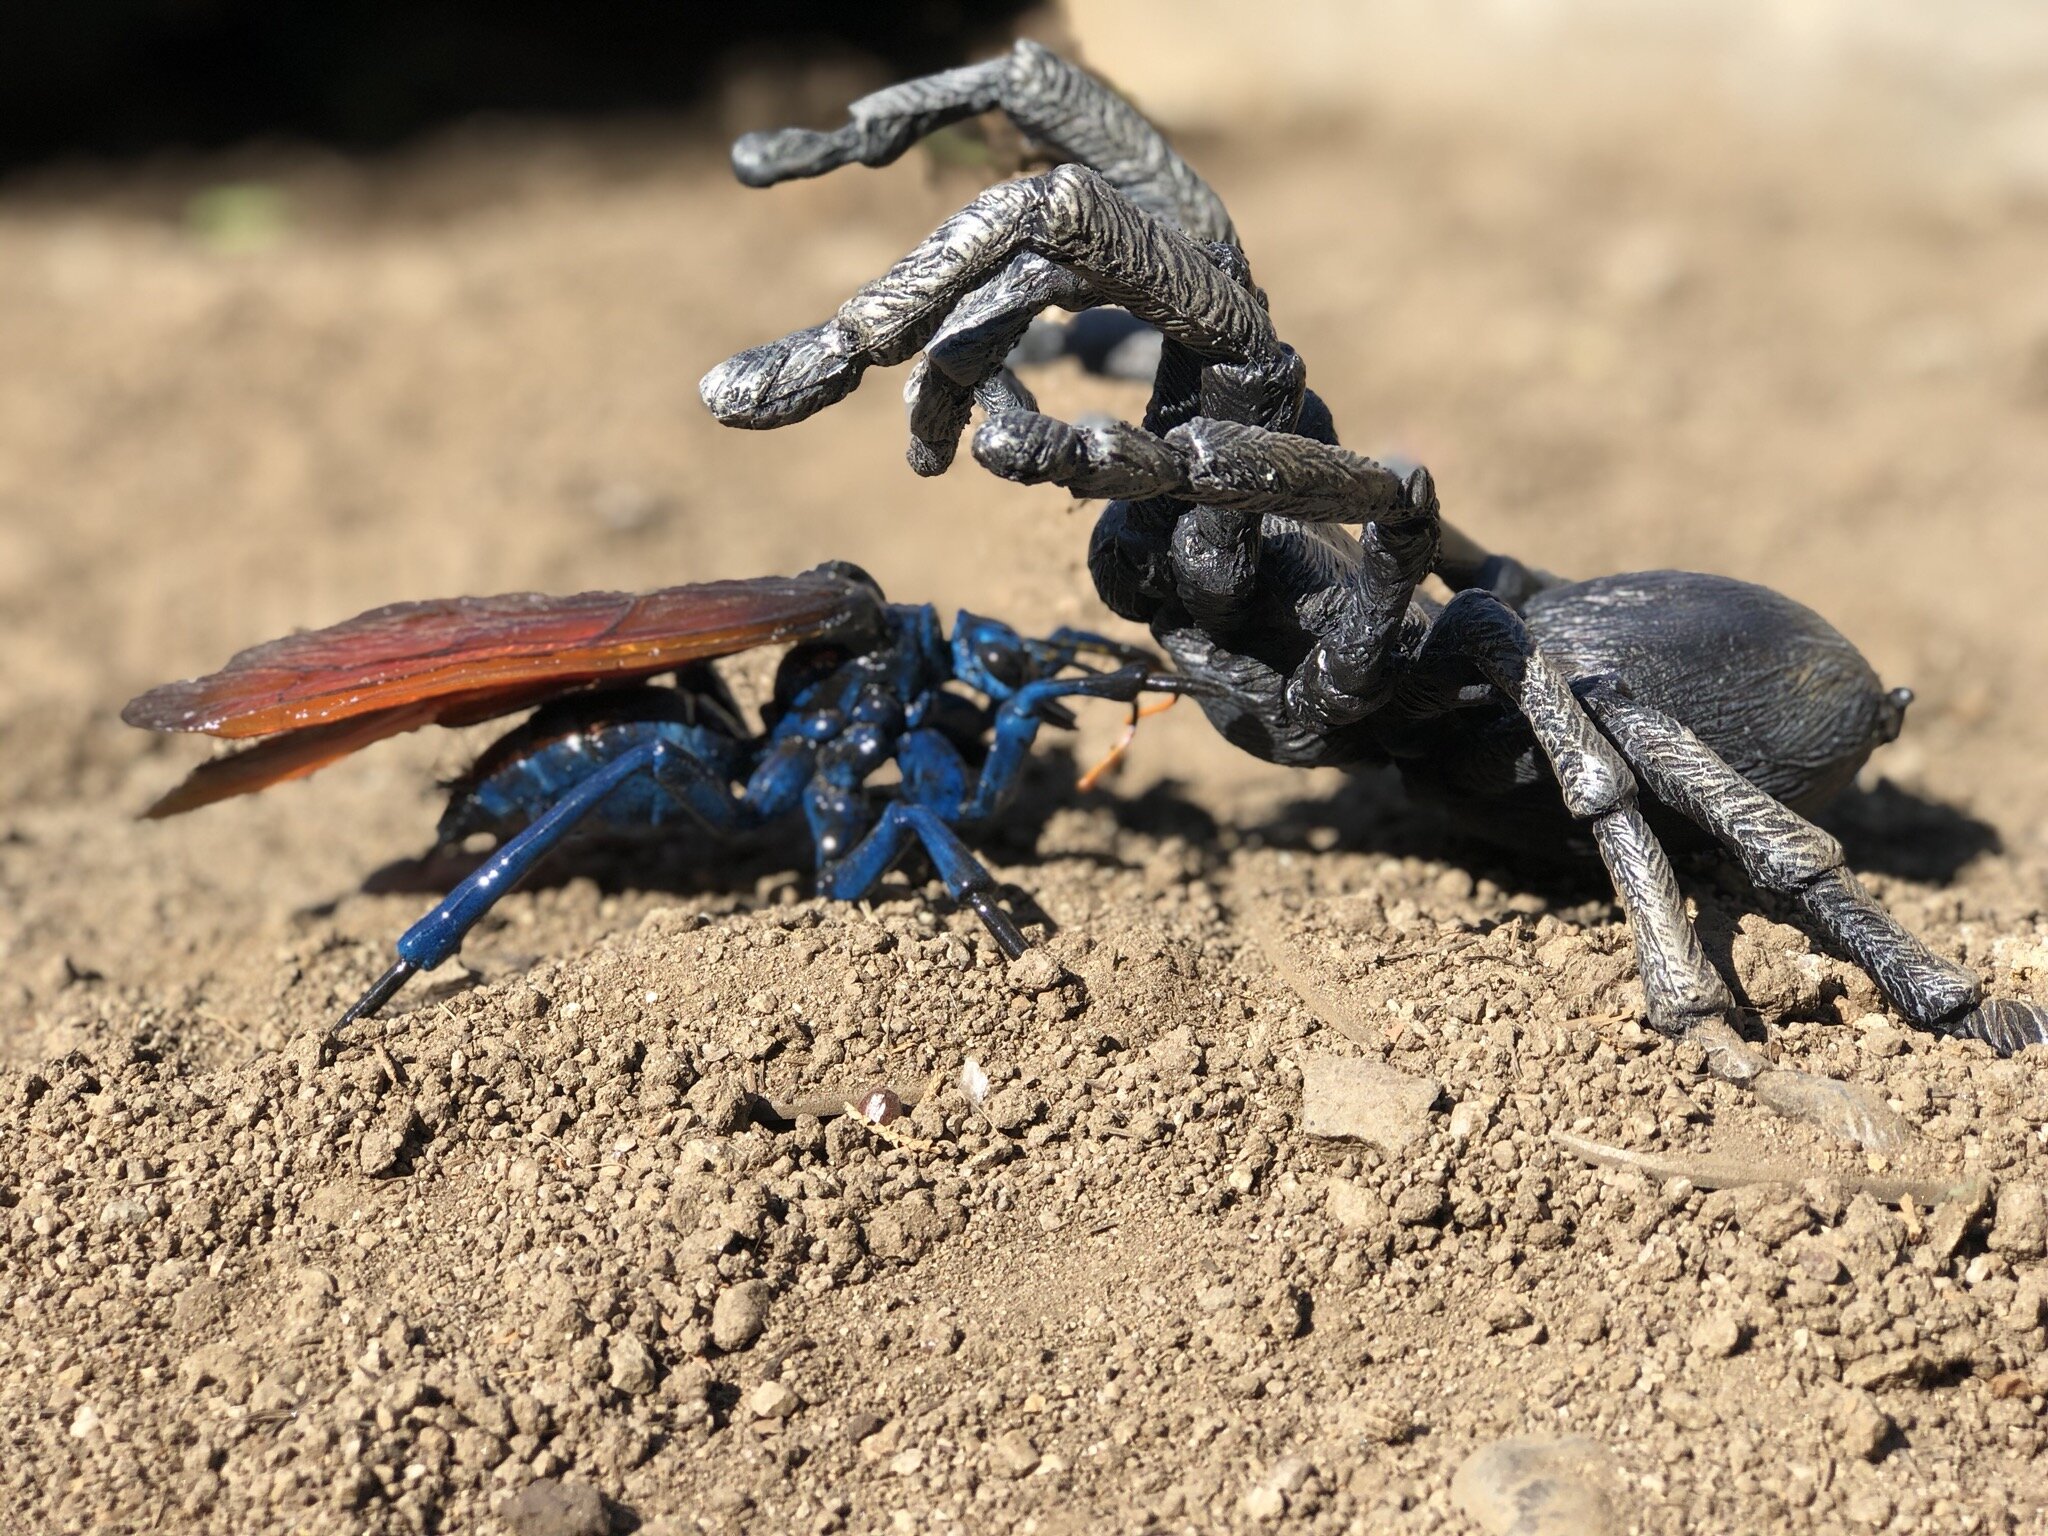  Stage one of a battle between a Tarantula Hawk Wasp and Tarantula. Sculpted, Molded and Painted for Aliso Woods and Canyon Park in Orange County, CA 